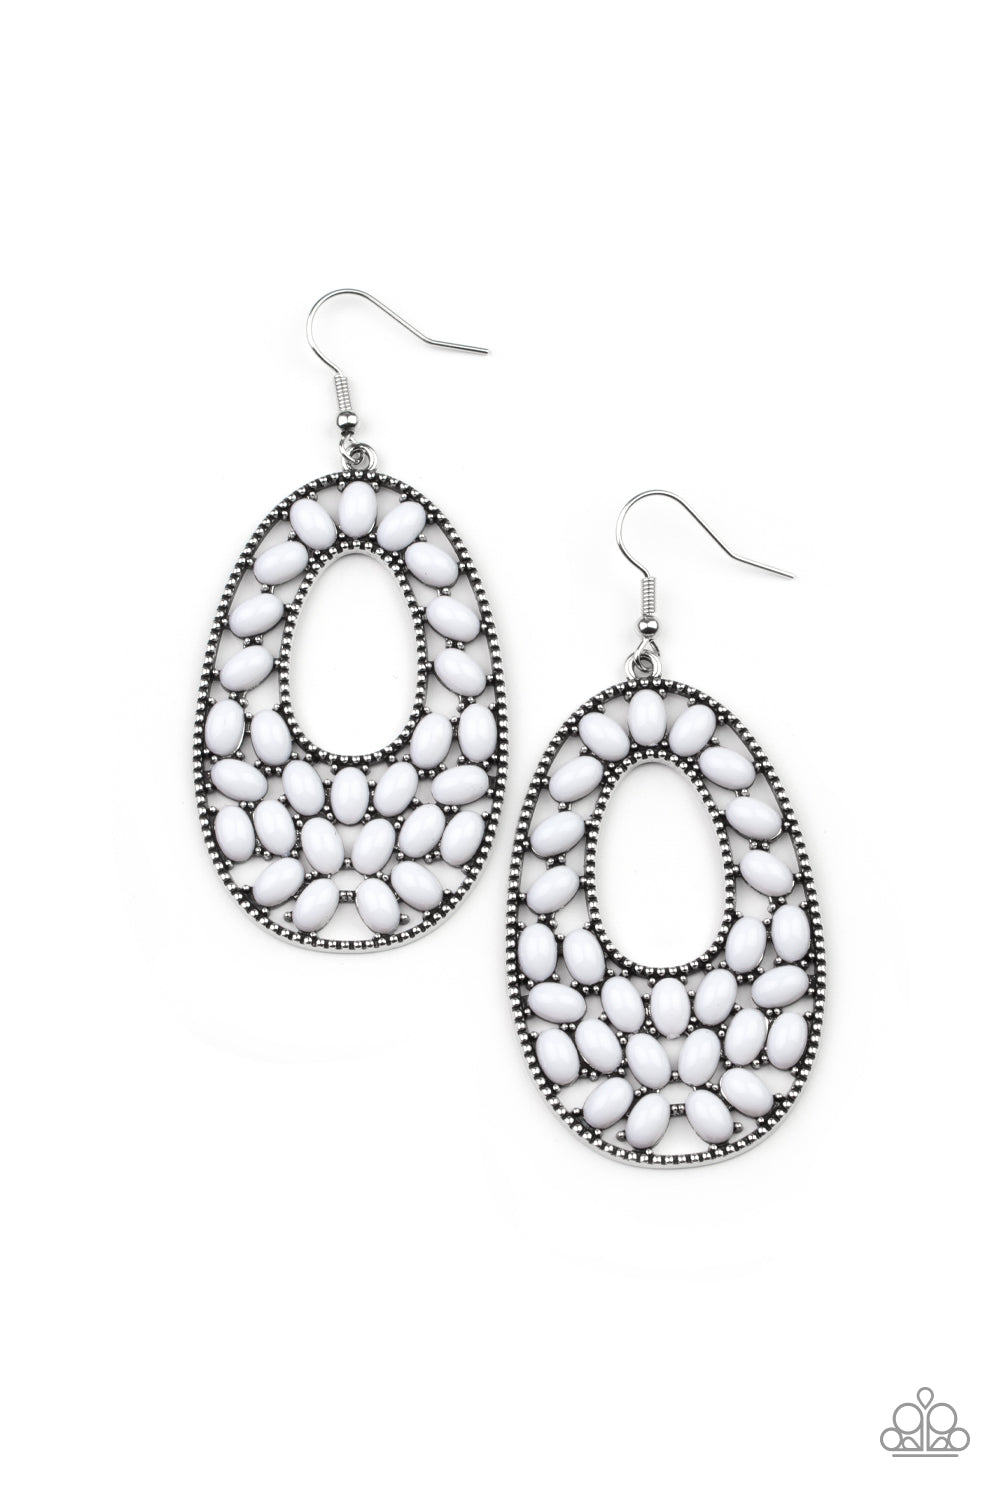 ​Beaded Shores - White and Silver Fashion Earrings - Paparazzi Accessories - A collection of oval white beads collect inside a studded silver oval frame, creating a bright pop of color. Earring attaches to a standard fishhook fitting. Sold as one pair of earrings.